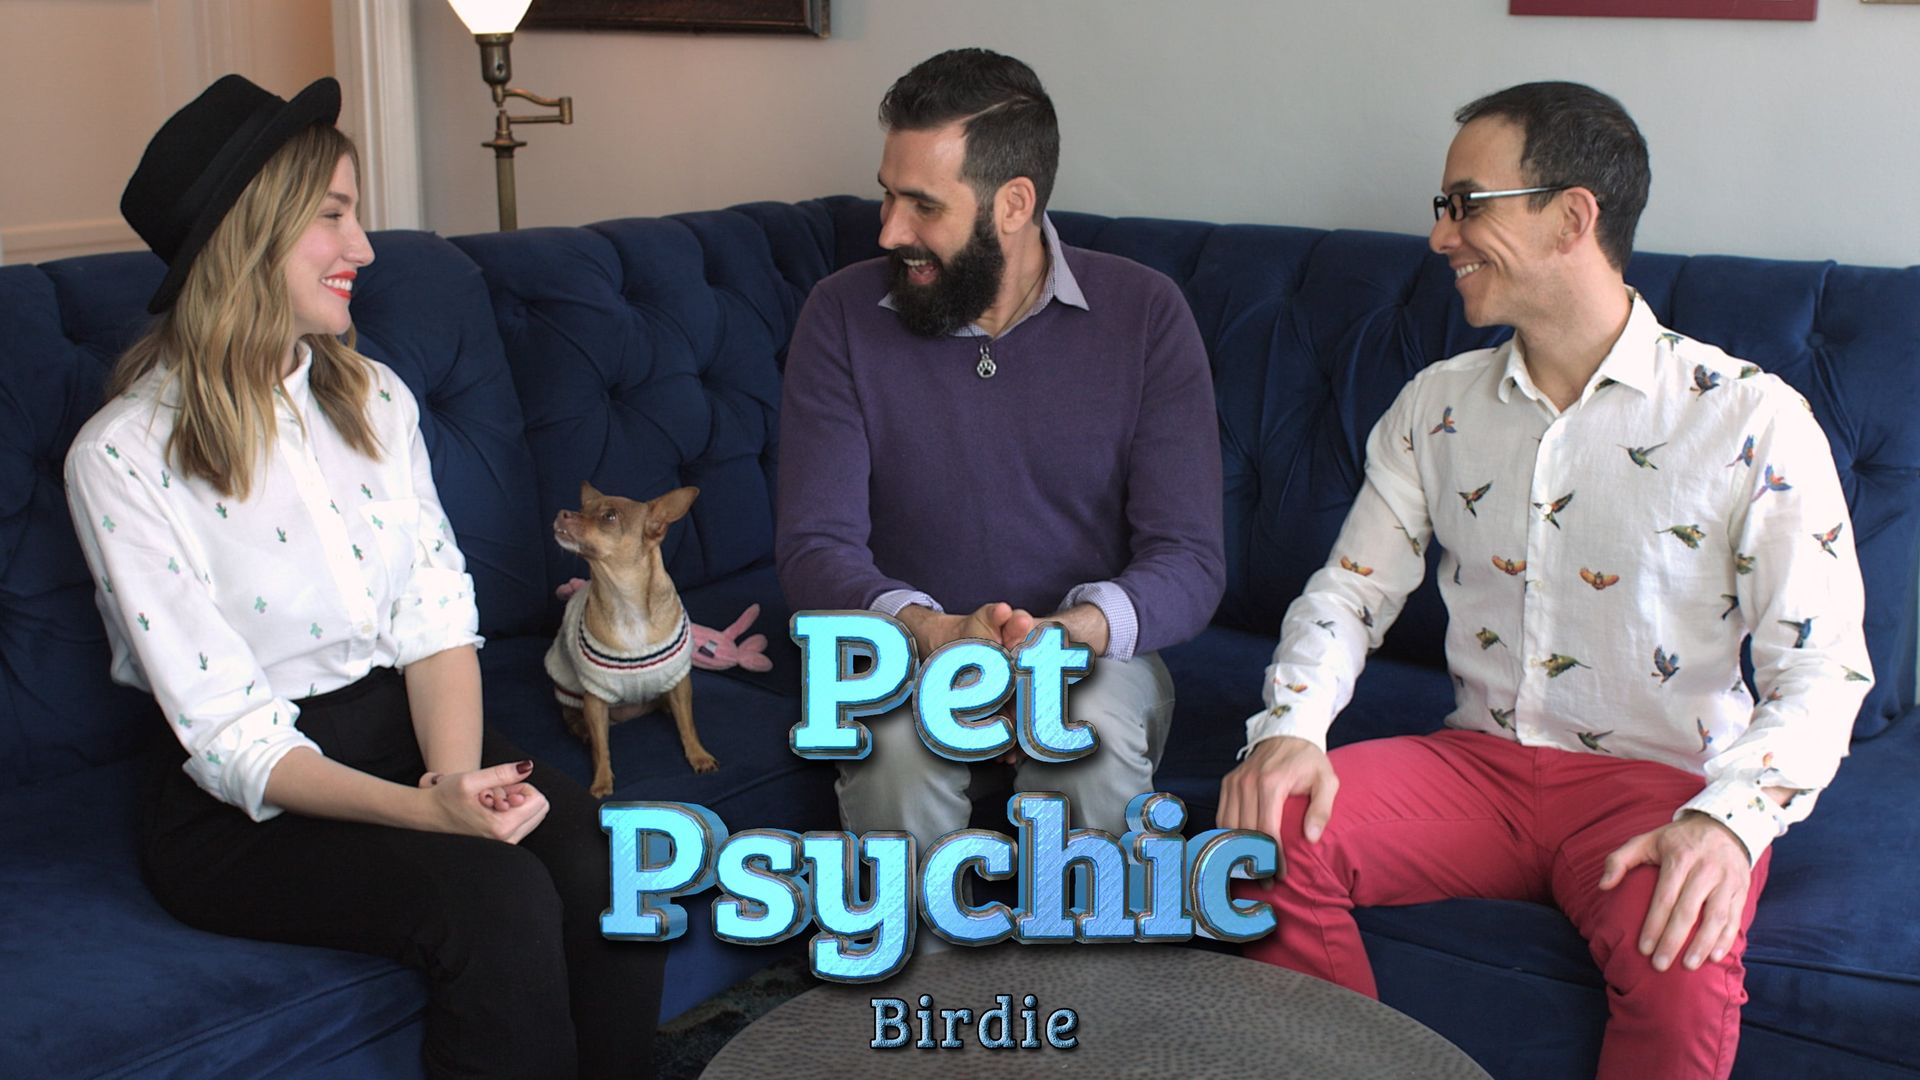 The Pet Psychic background